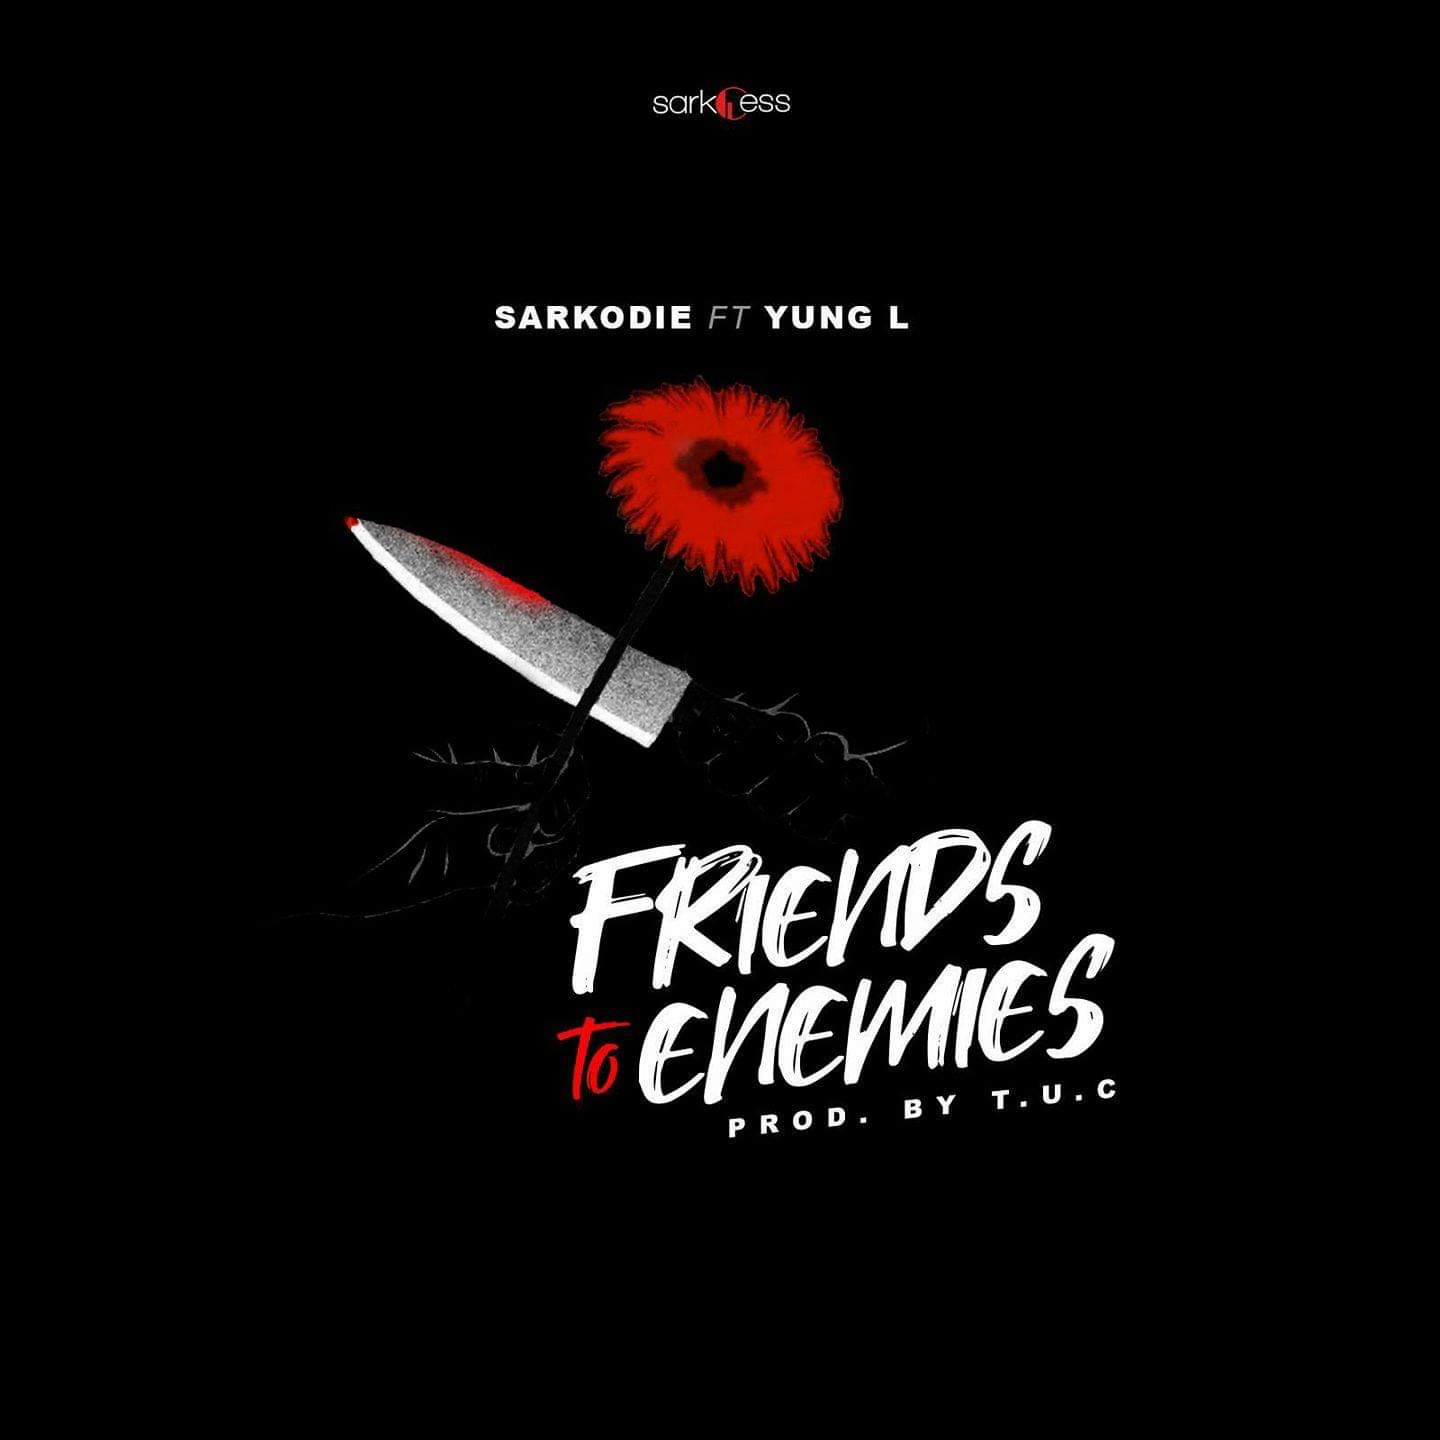 Sarkodie ft. Yung L – Friends To Enemies (Prod. By T.U.C)